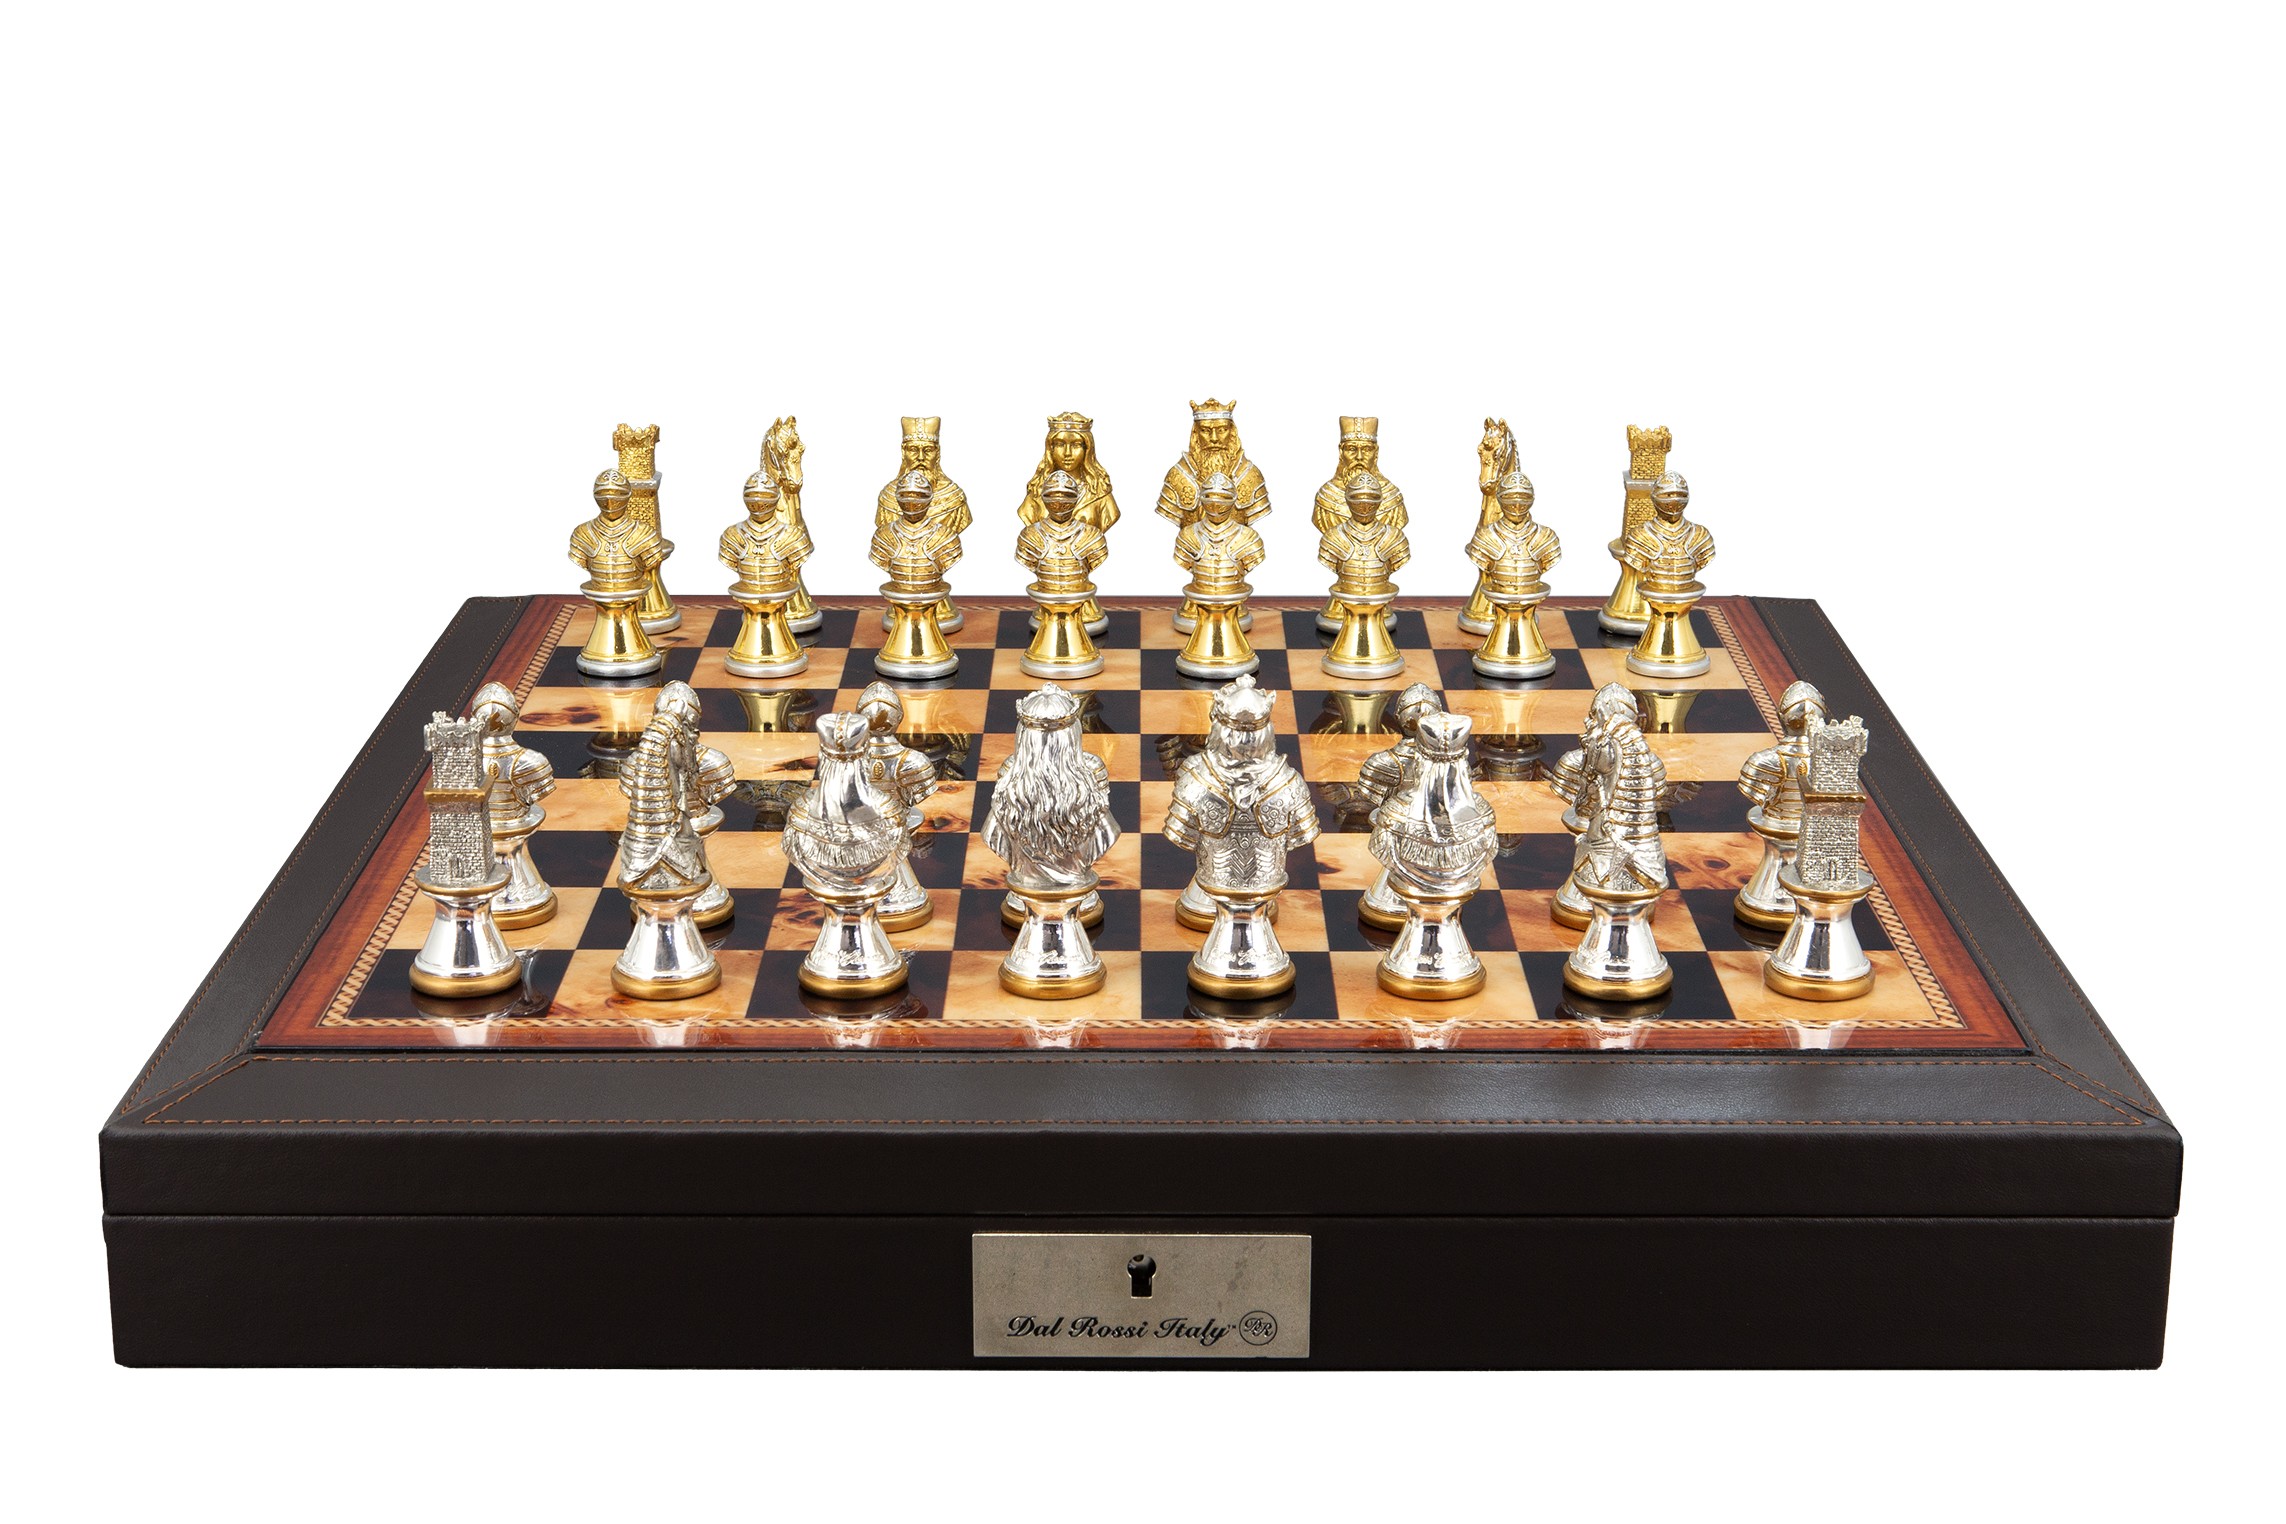 Dal Rossi Italy, Medieval Warriors Metal Chessmen 85mm on a Brown PU Leather Bevelled Edge chess box with compartments 18"